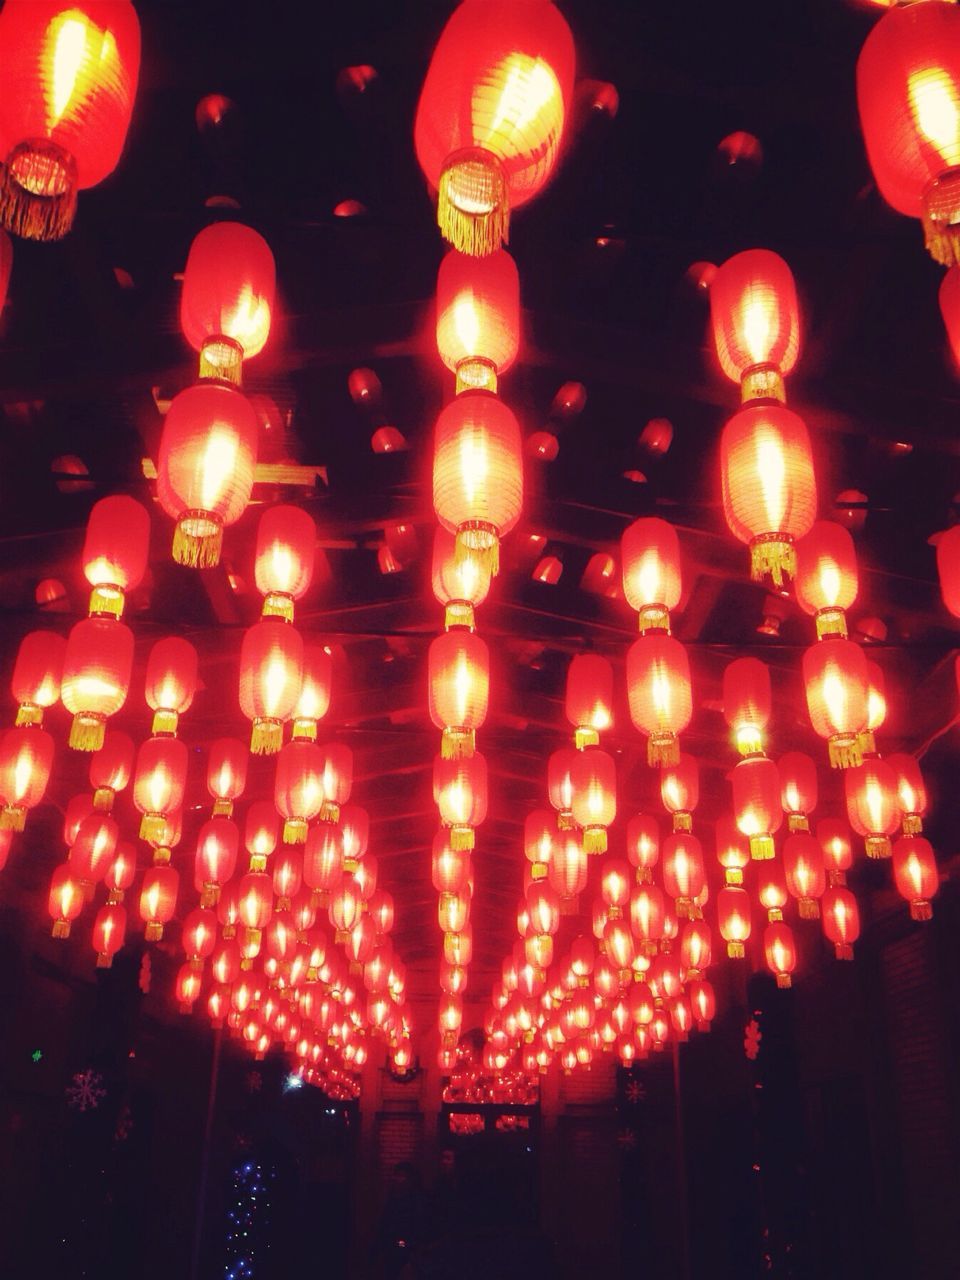 illuminated, lighting equipment, night, low angle view, hanging, decoration, lantern, glowing, celebration, indoors, electric light, light - natural phenomenon, chinese lantern, electricity, ceiling, in a row, tradition, red, cultures, pattern